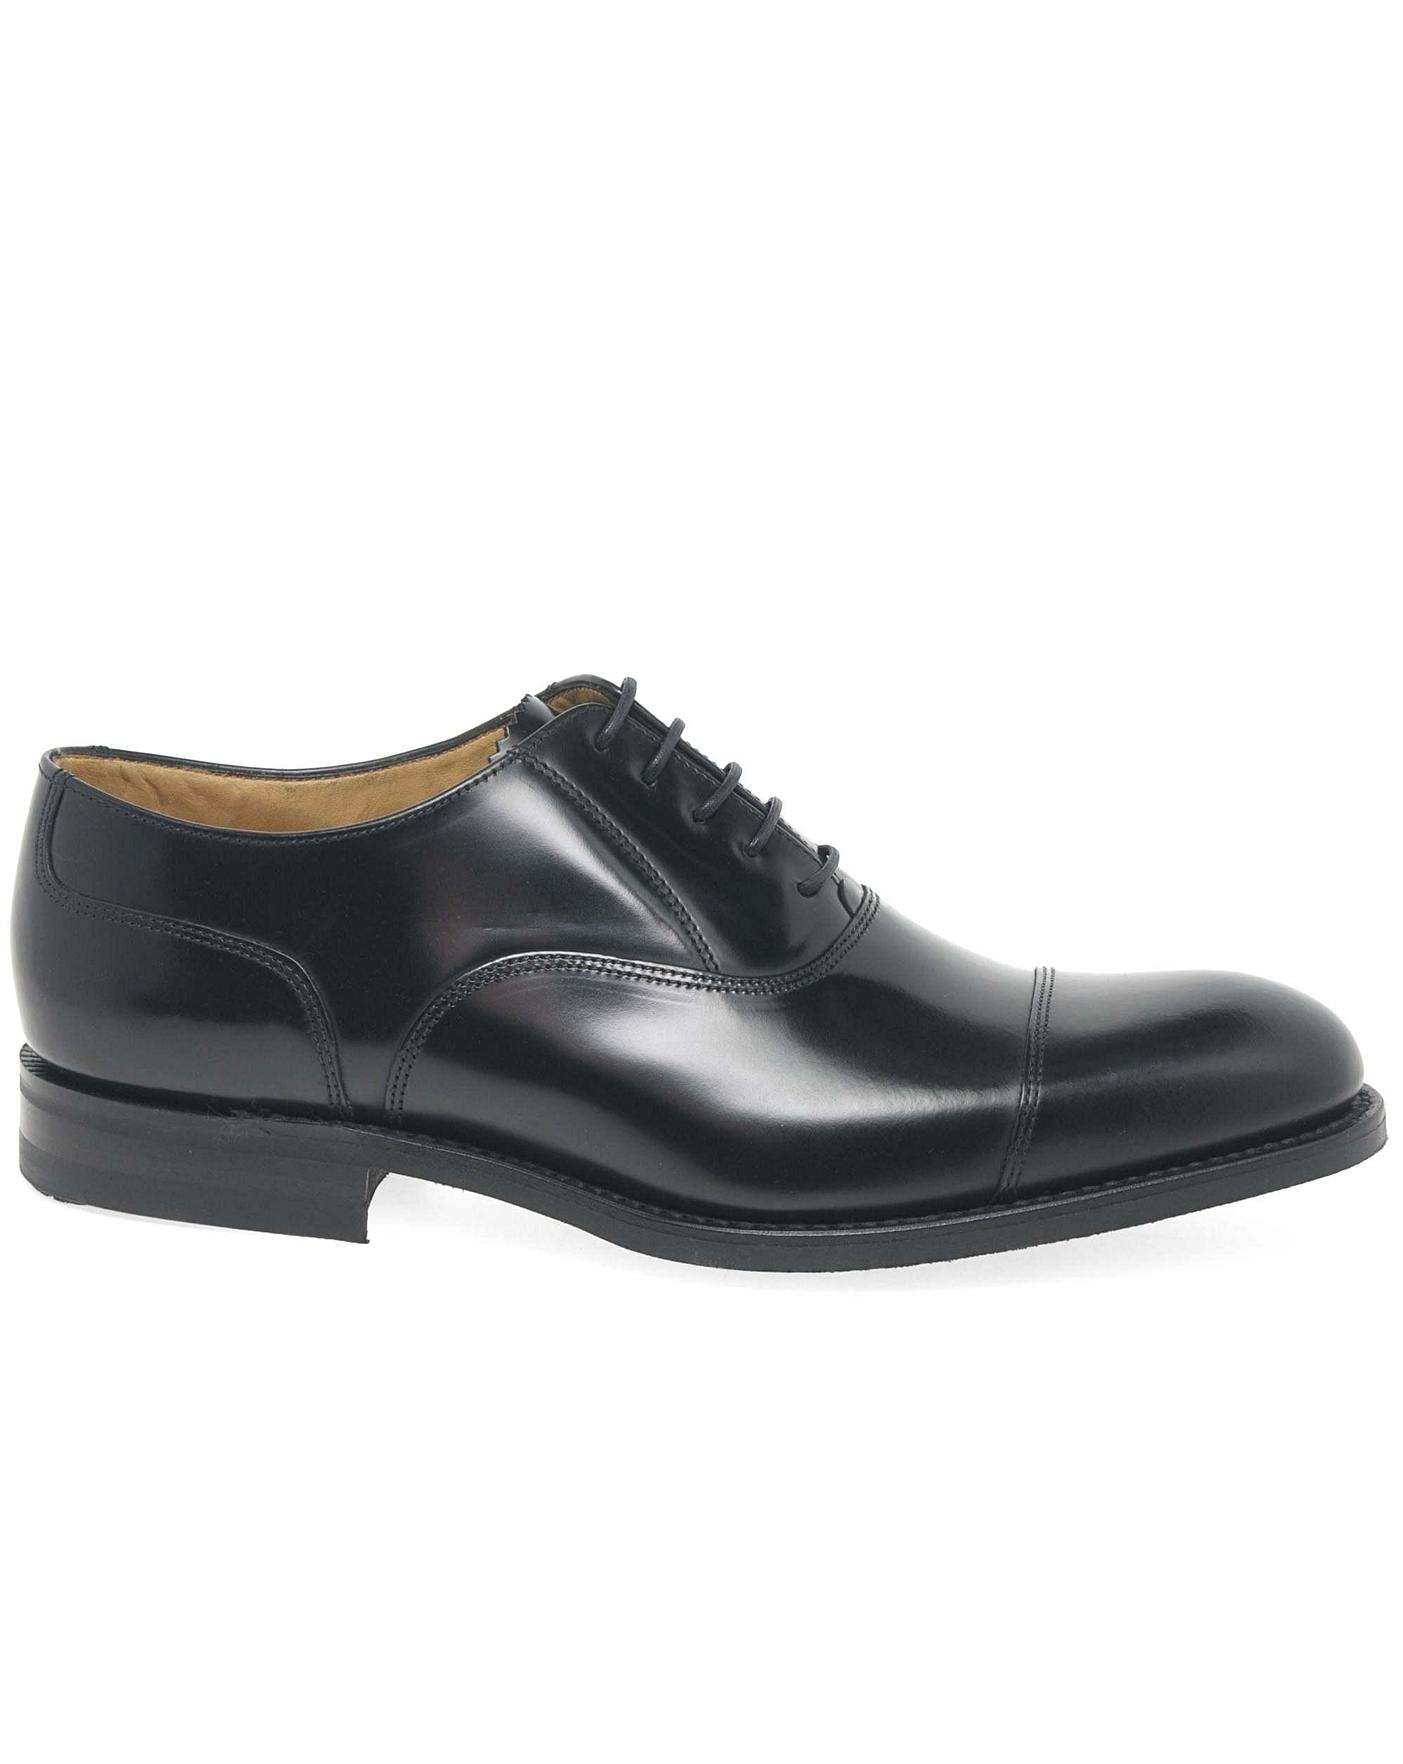 Loake 806B Standard Fit Oxford Shoes 